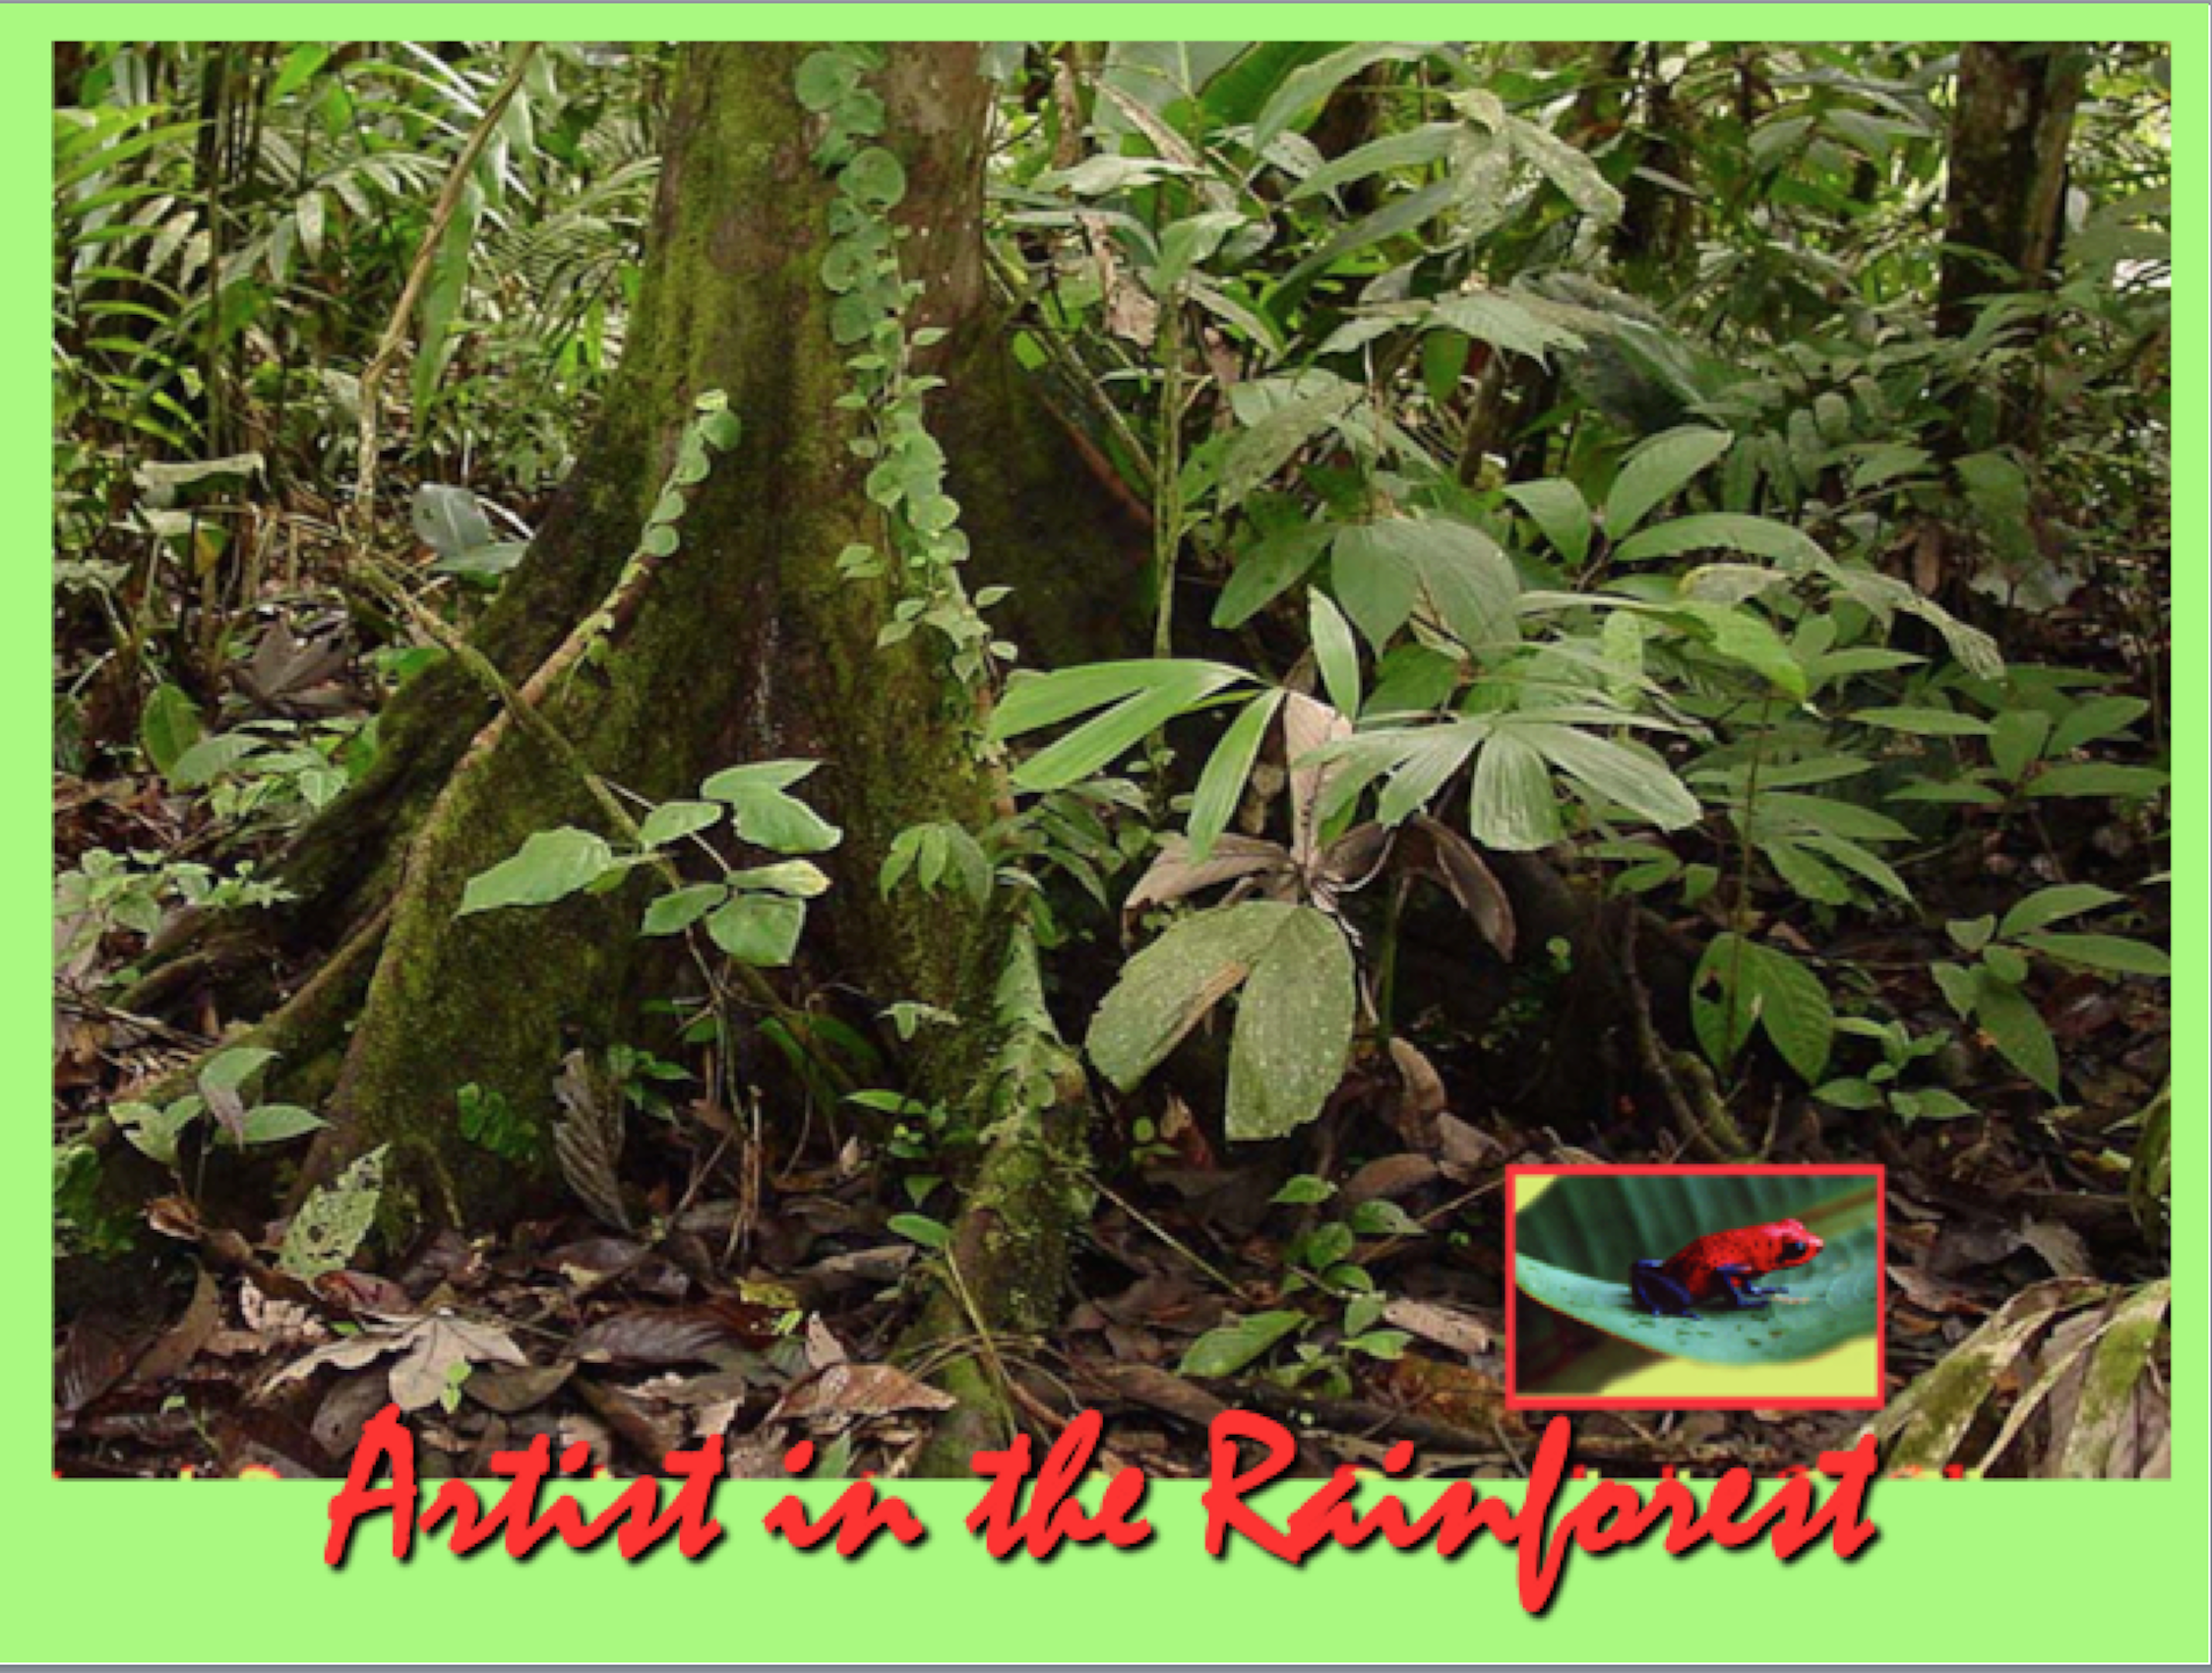 Artist in the Rainforest 2019-05-07 at 4.41.03 PM.png